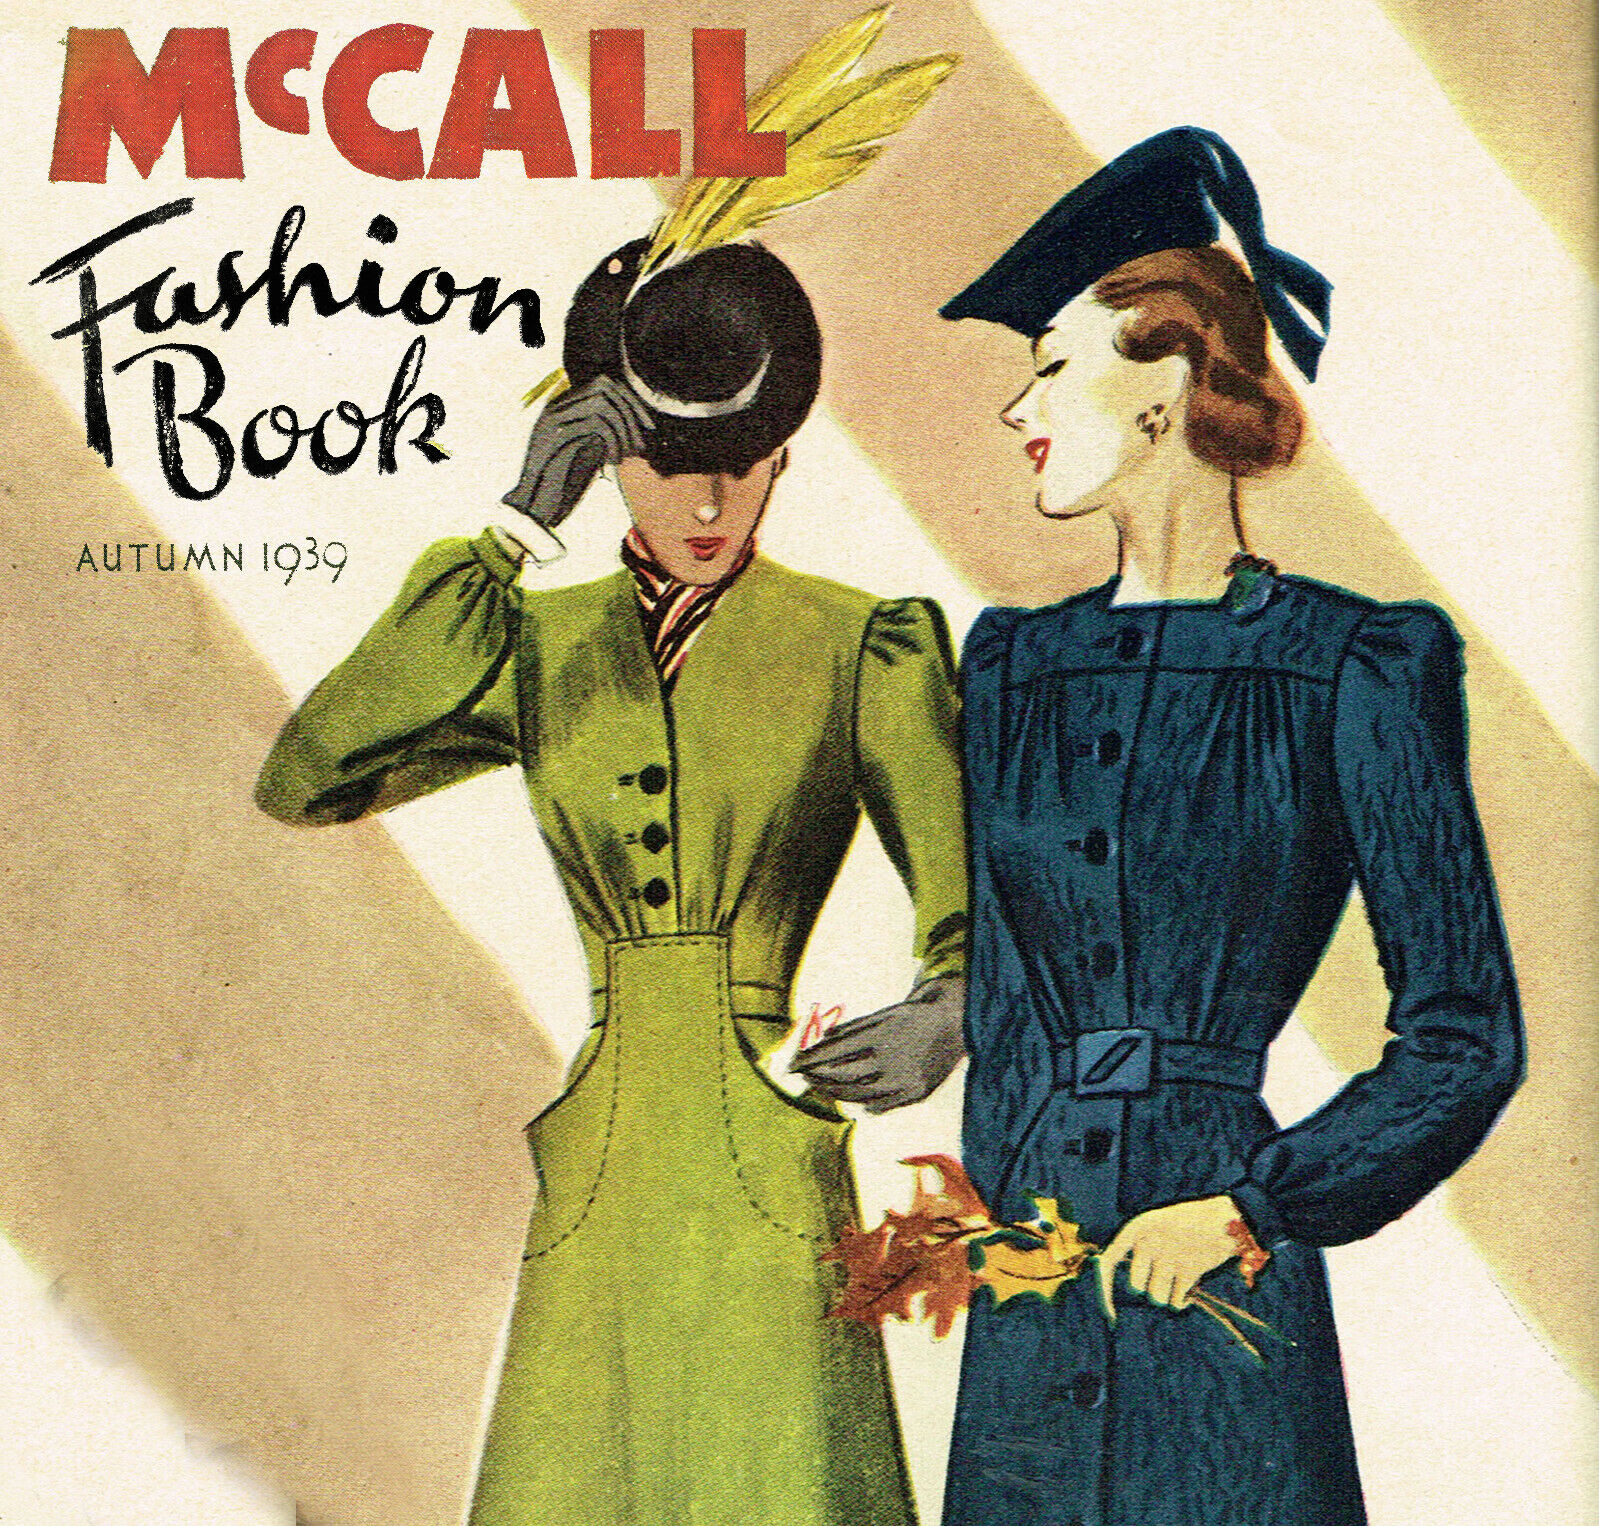 1930s Vintage McCall Fashion Book Fall 1939 Pattern Catalog Ebook Copy on CD